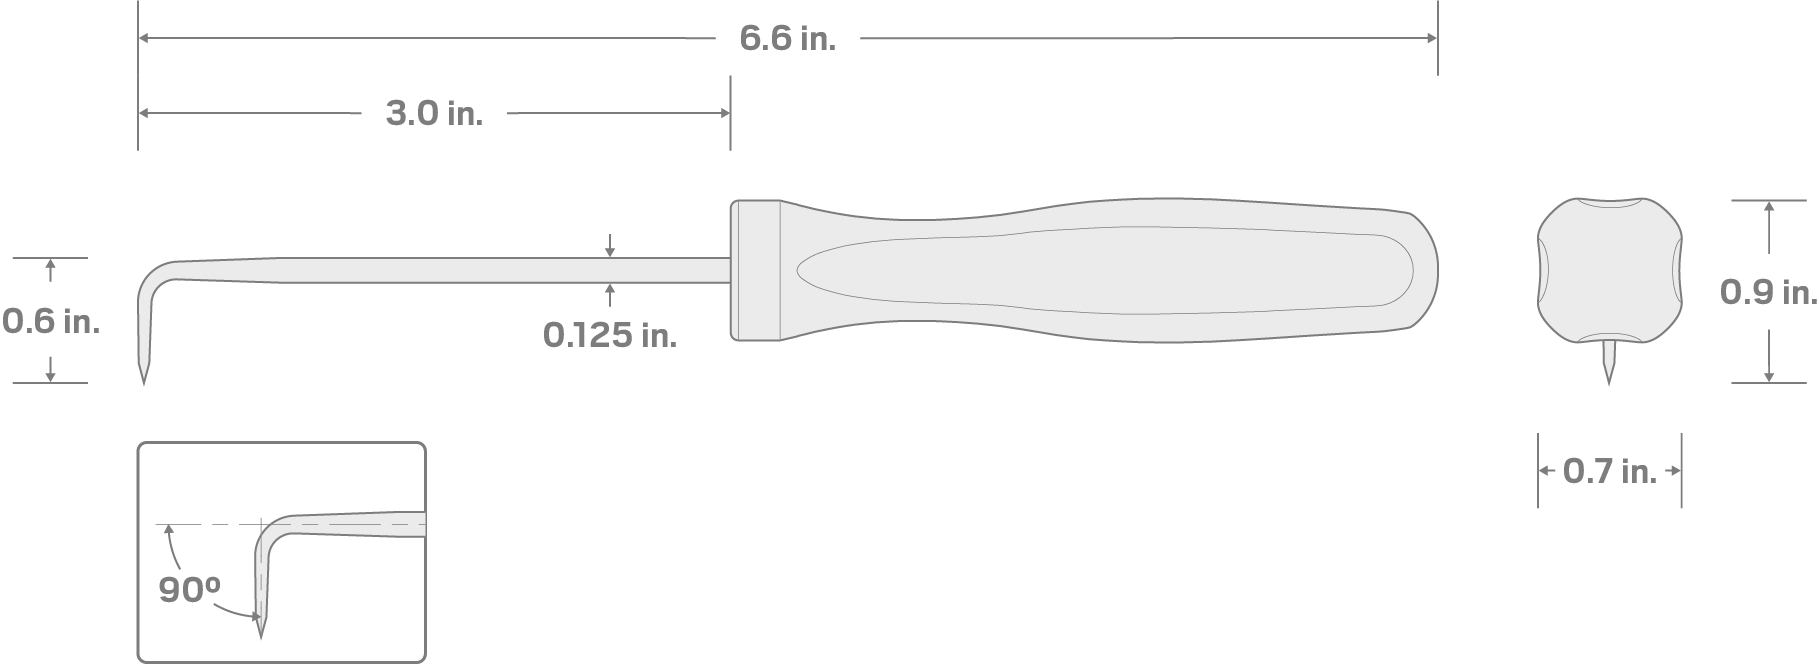 Specs for 90-Degree Bent Pick (1/8 Inch x 3 Inch)